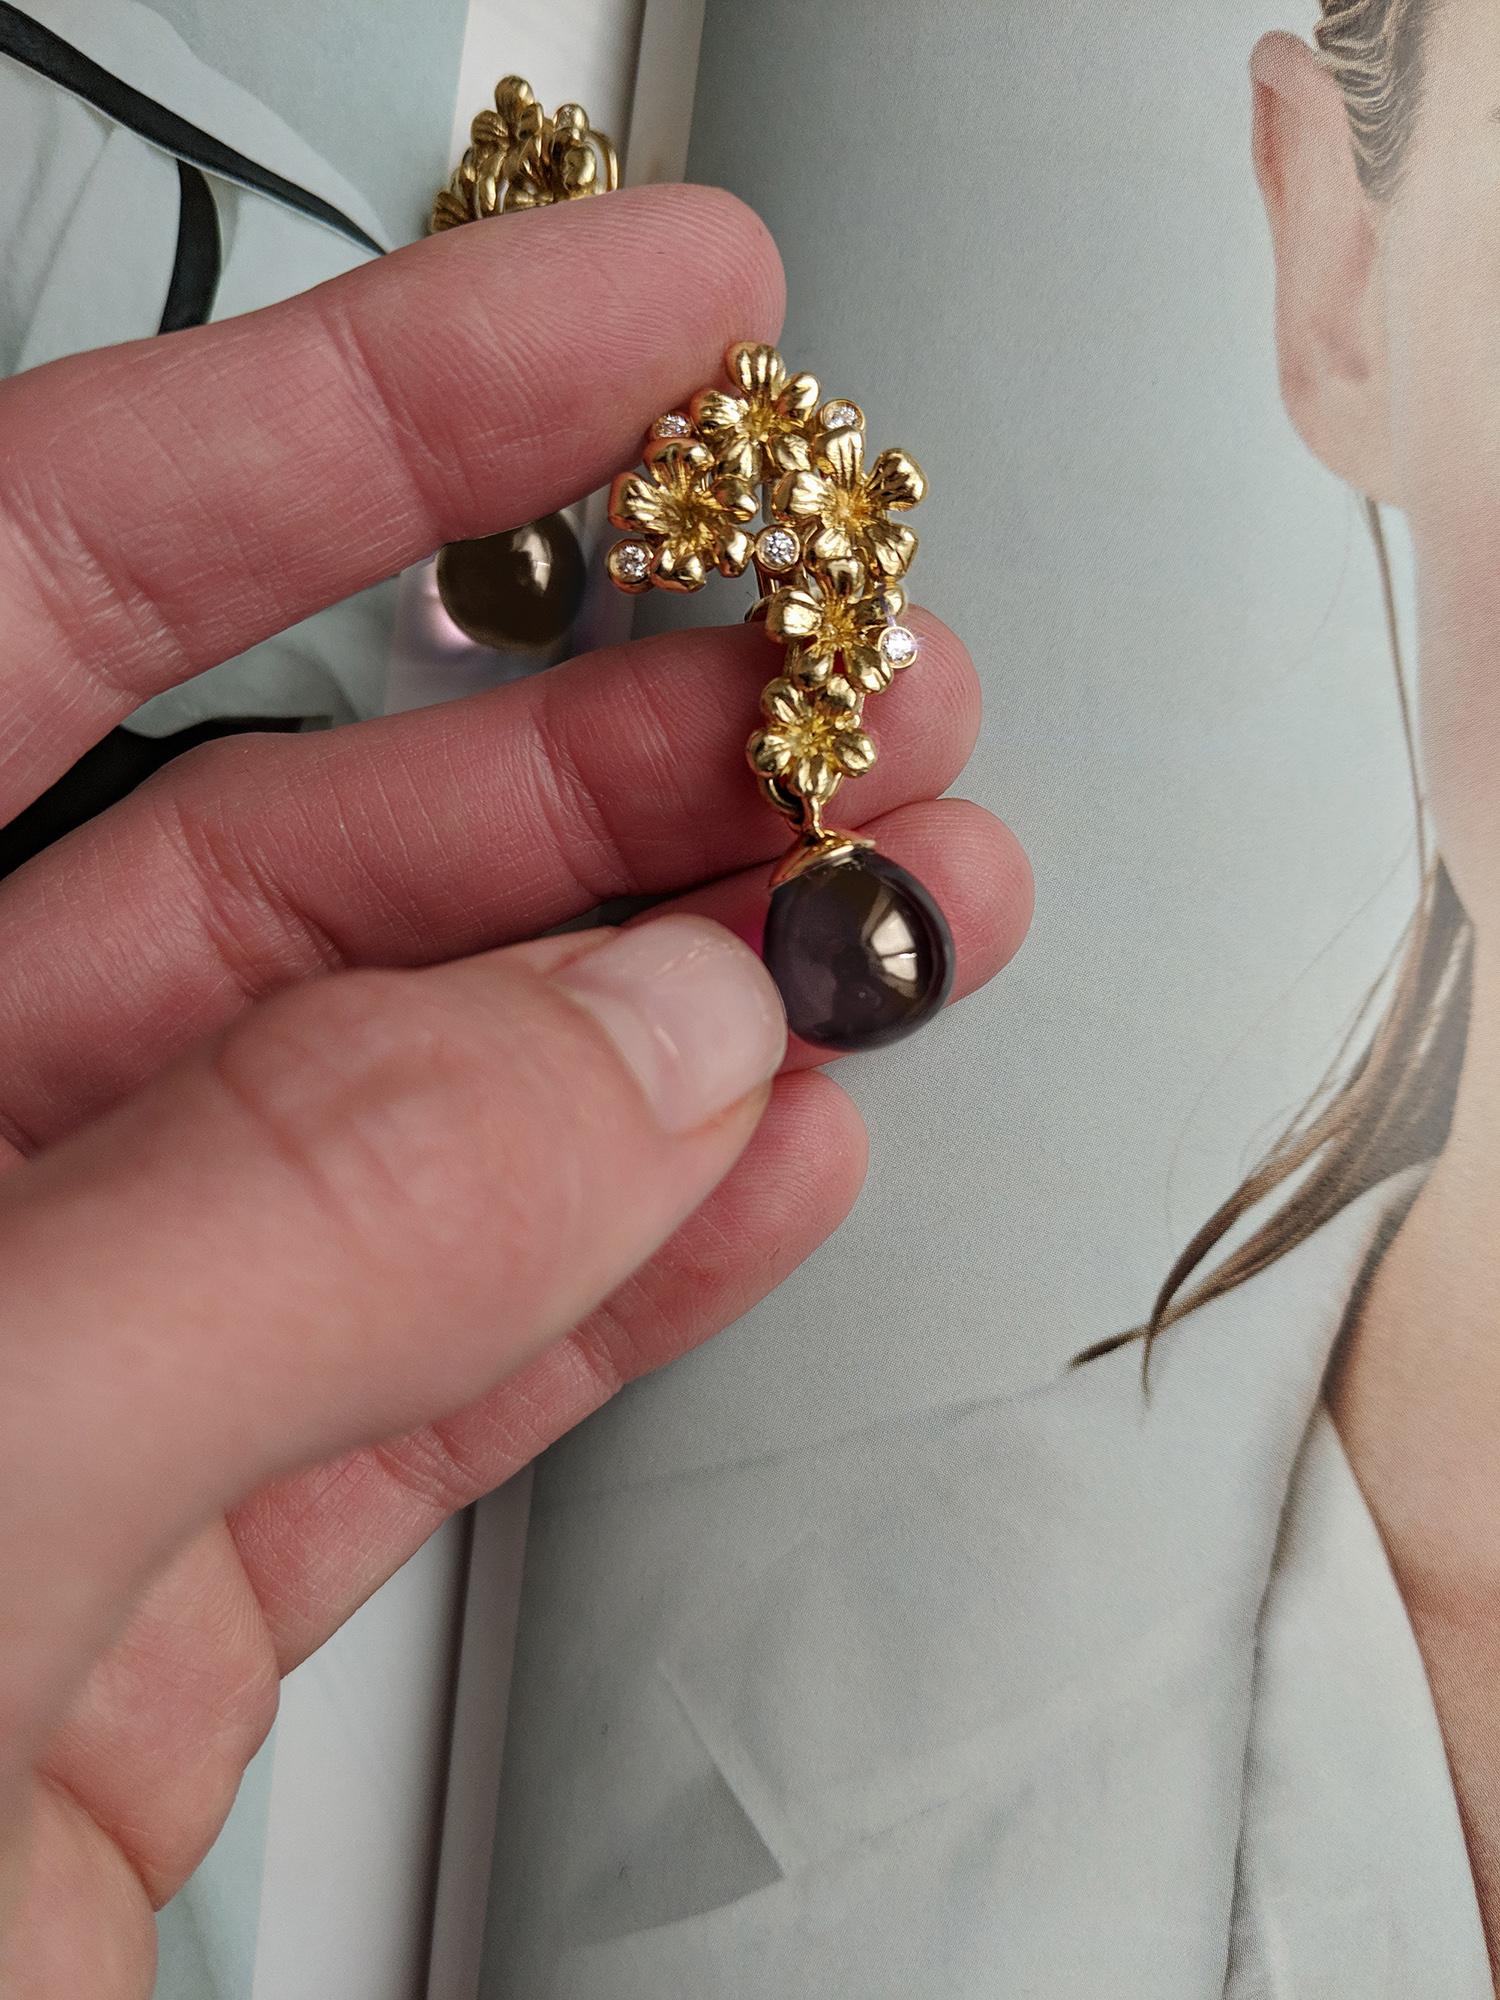 This Plum Blossom necklace pendant is a unique sculptural piece made from 14 karat yellow gold, encrusted with 5 round diamonds and a removable cabochon smoky quartz drop. We use top natural diamonds, VS clarity and F-G color, and work with a German